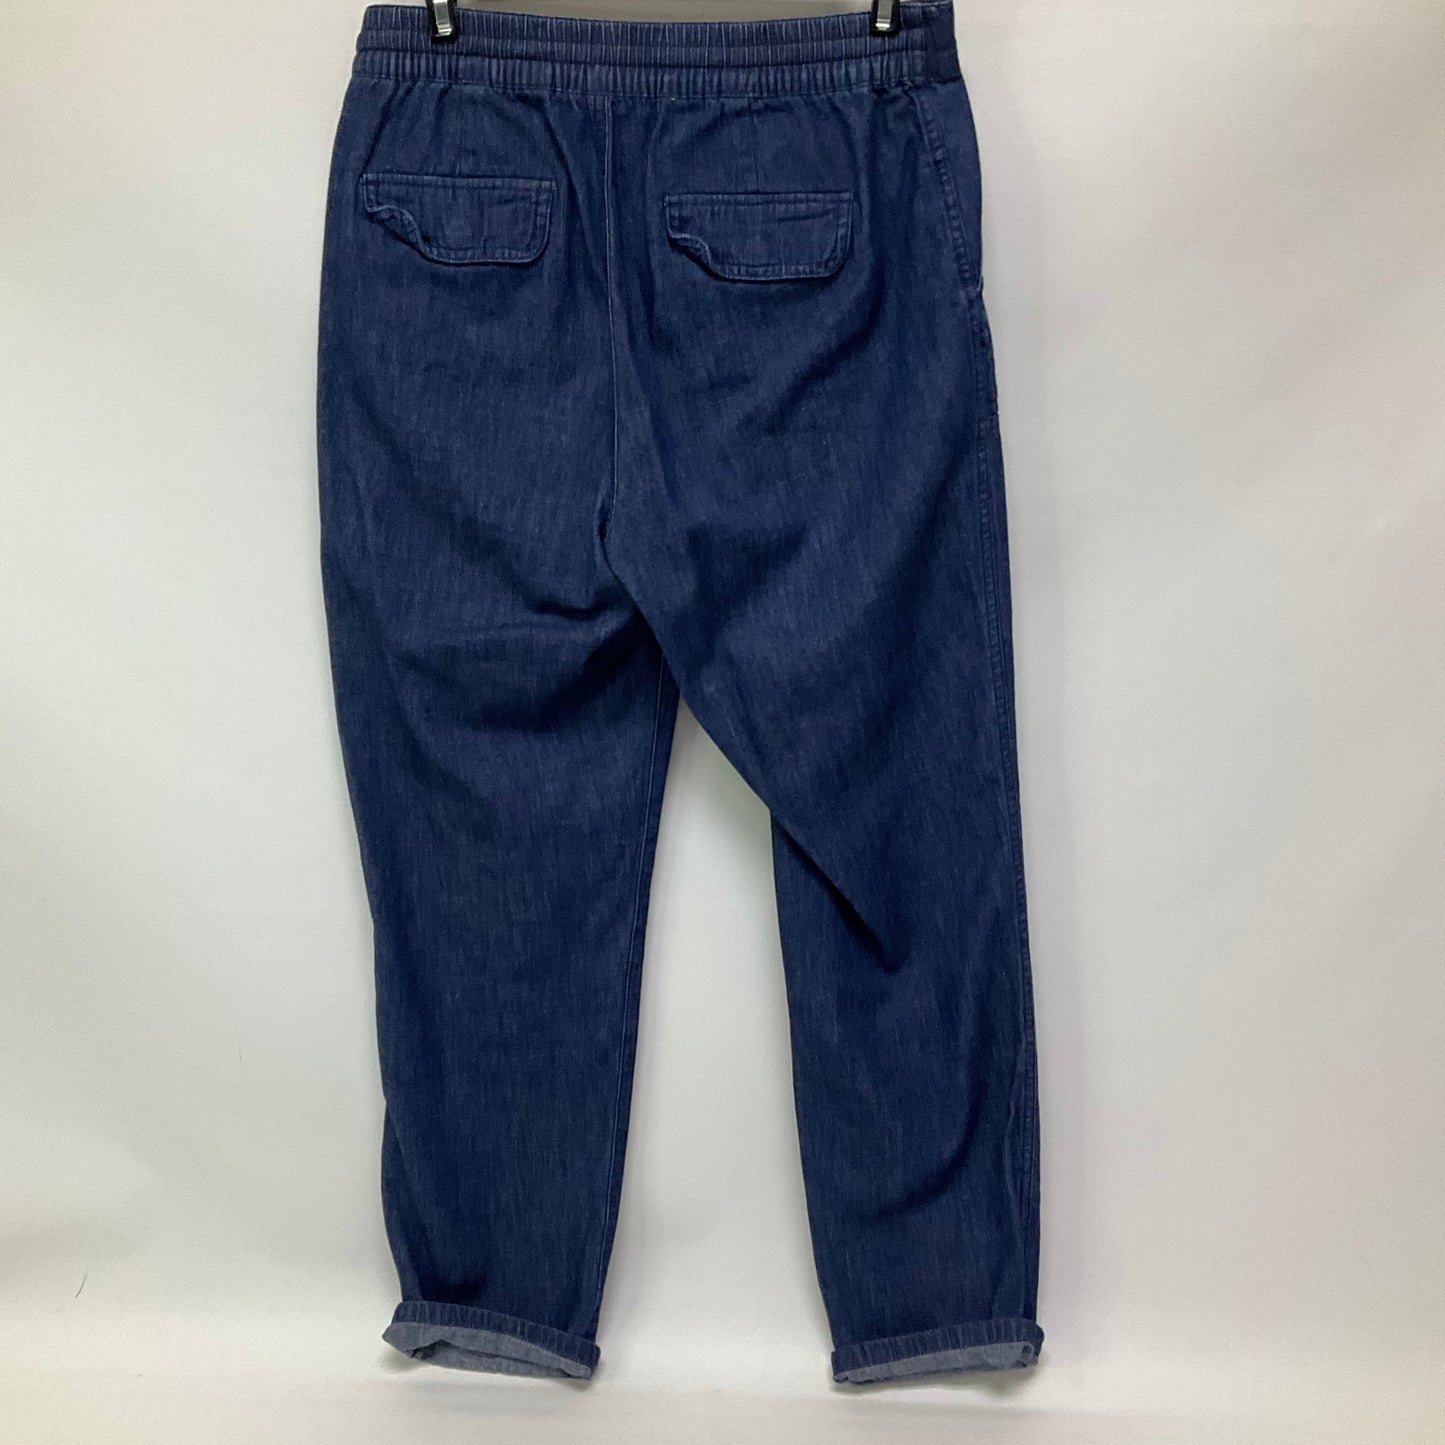 Pants Ankle By J Crew  Size: Xs